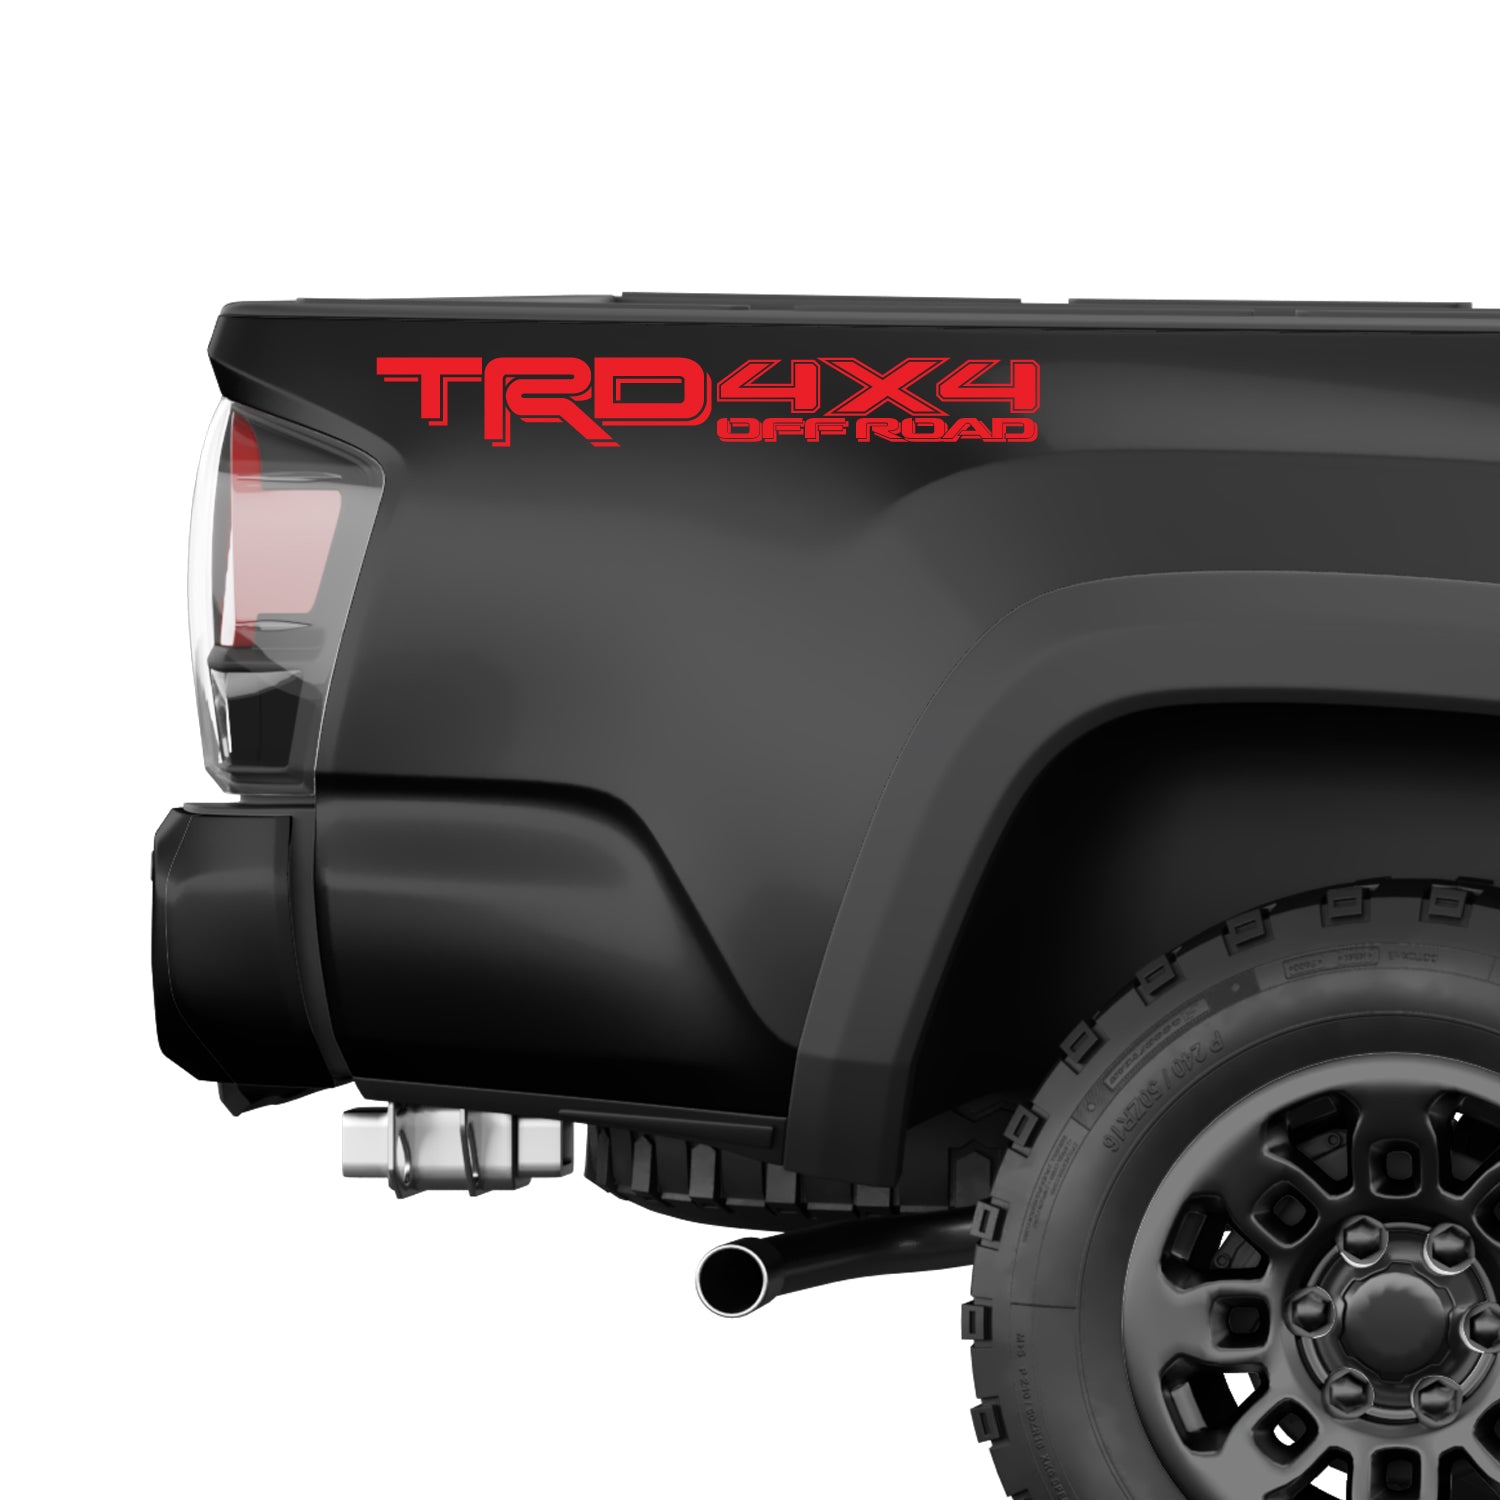 TRD 4x4 Off Road Decals Stickers